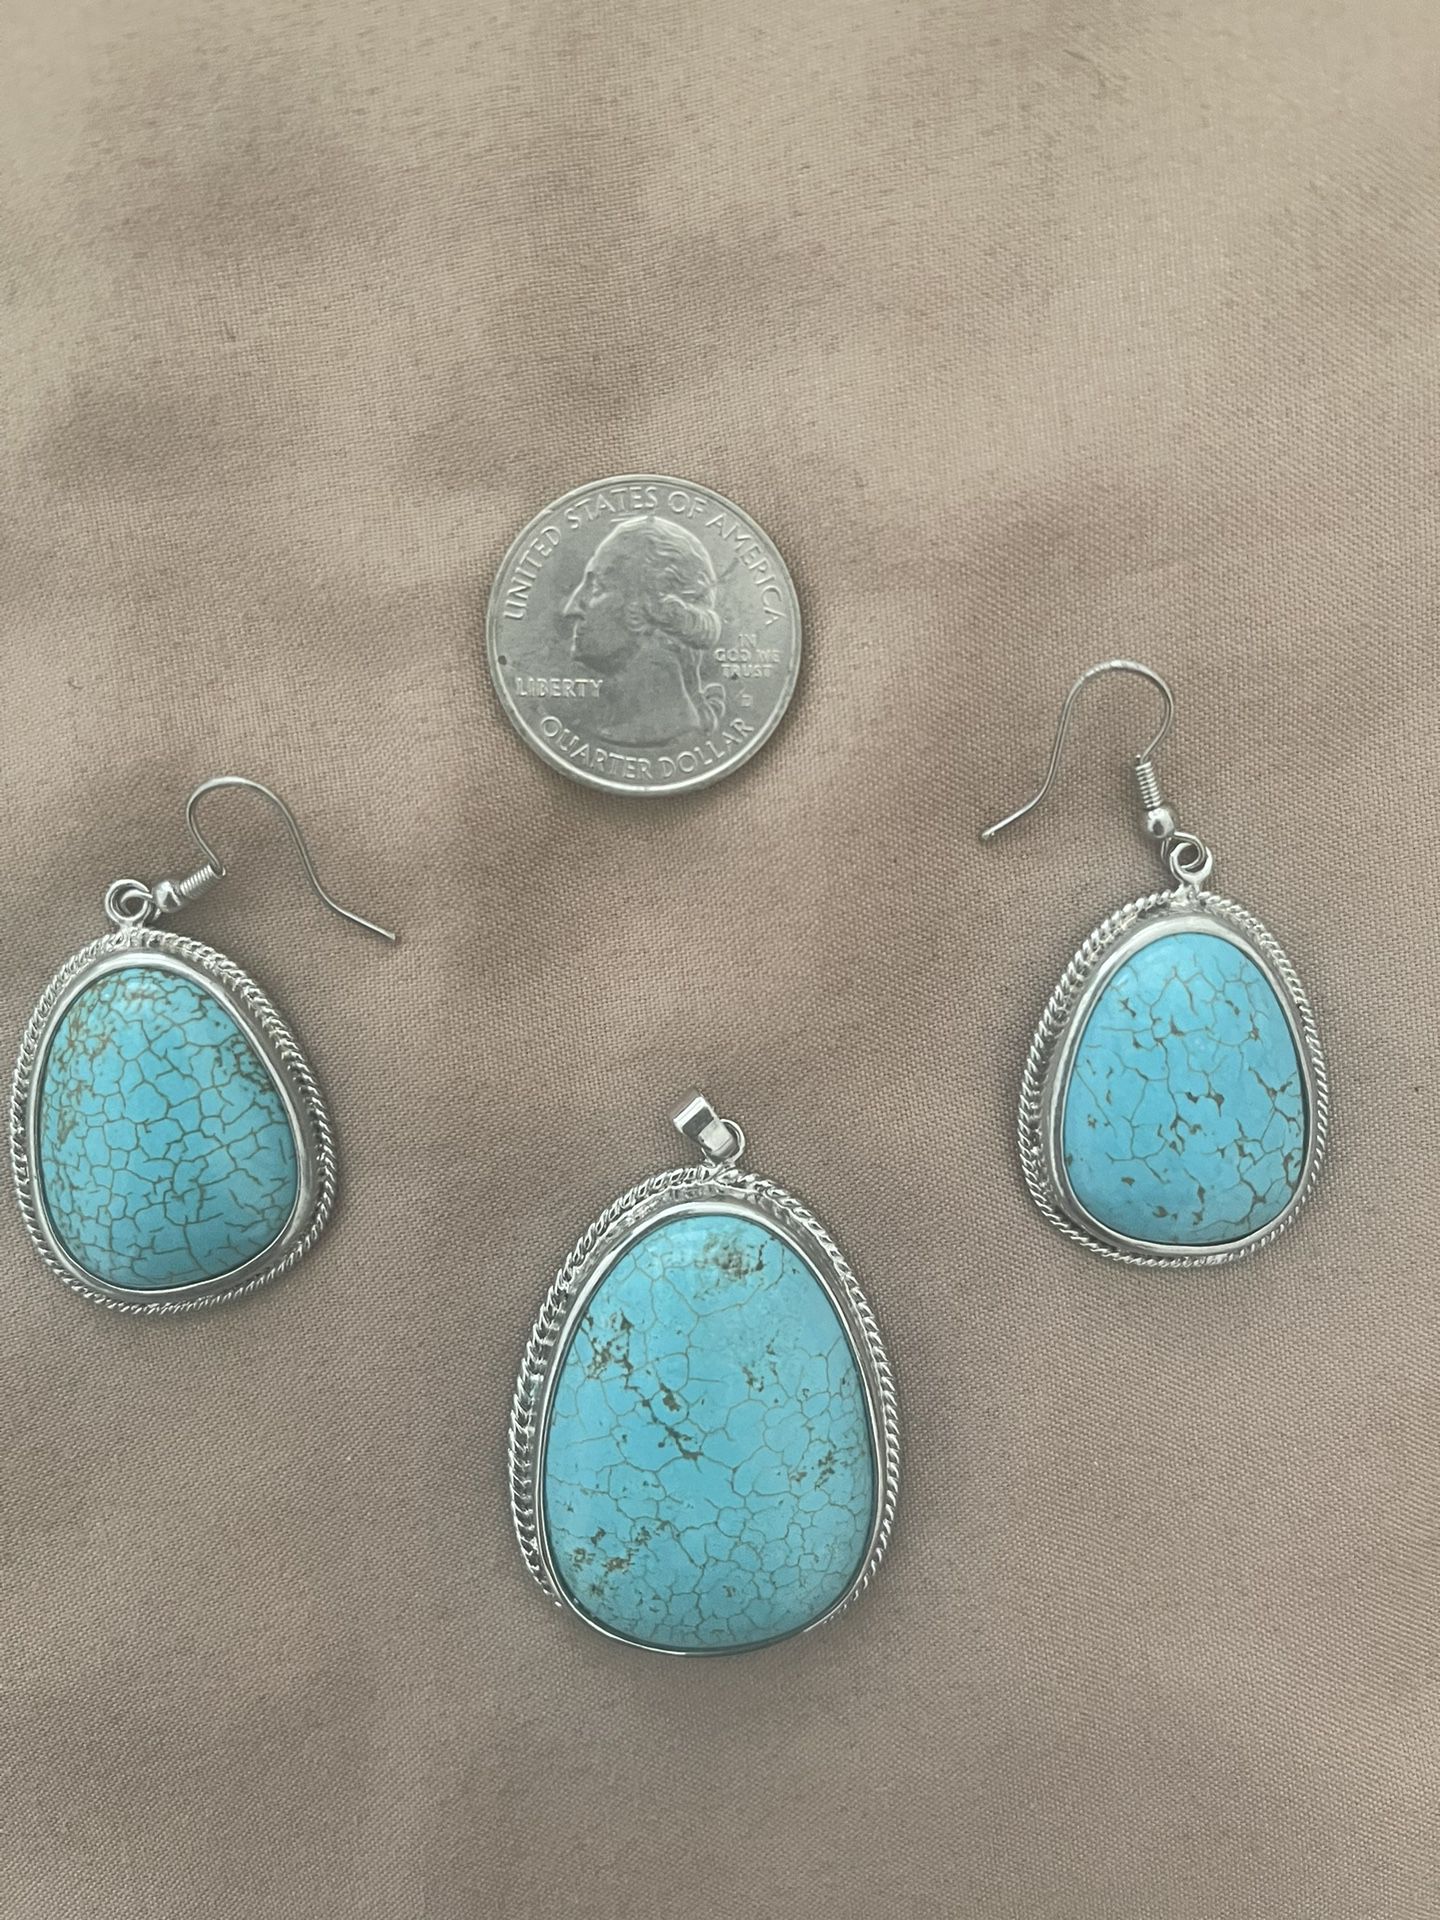 Turquoise Matching Pendent And Earrings 